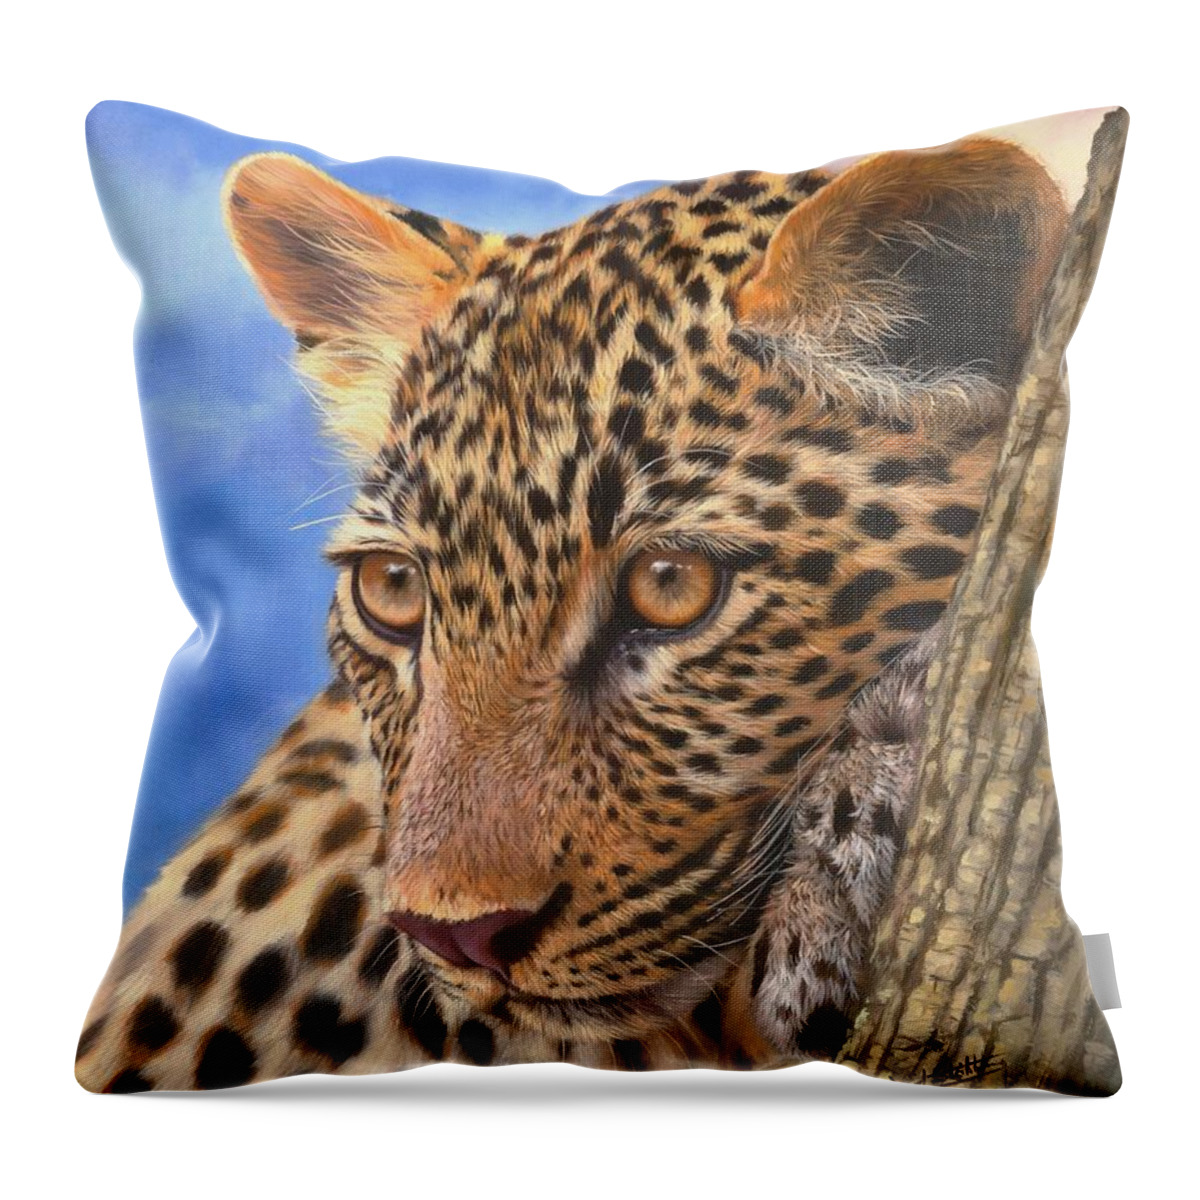 Leopard Throw Pillow featuring the painting Young Leopard by David Stribbling